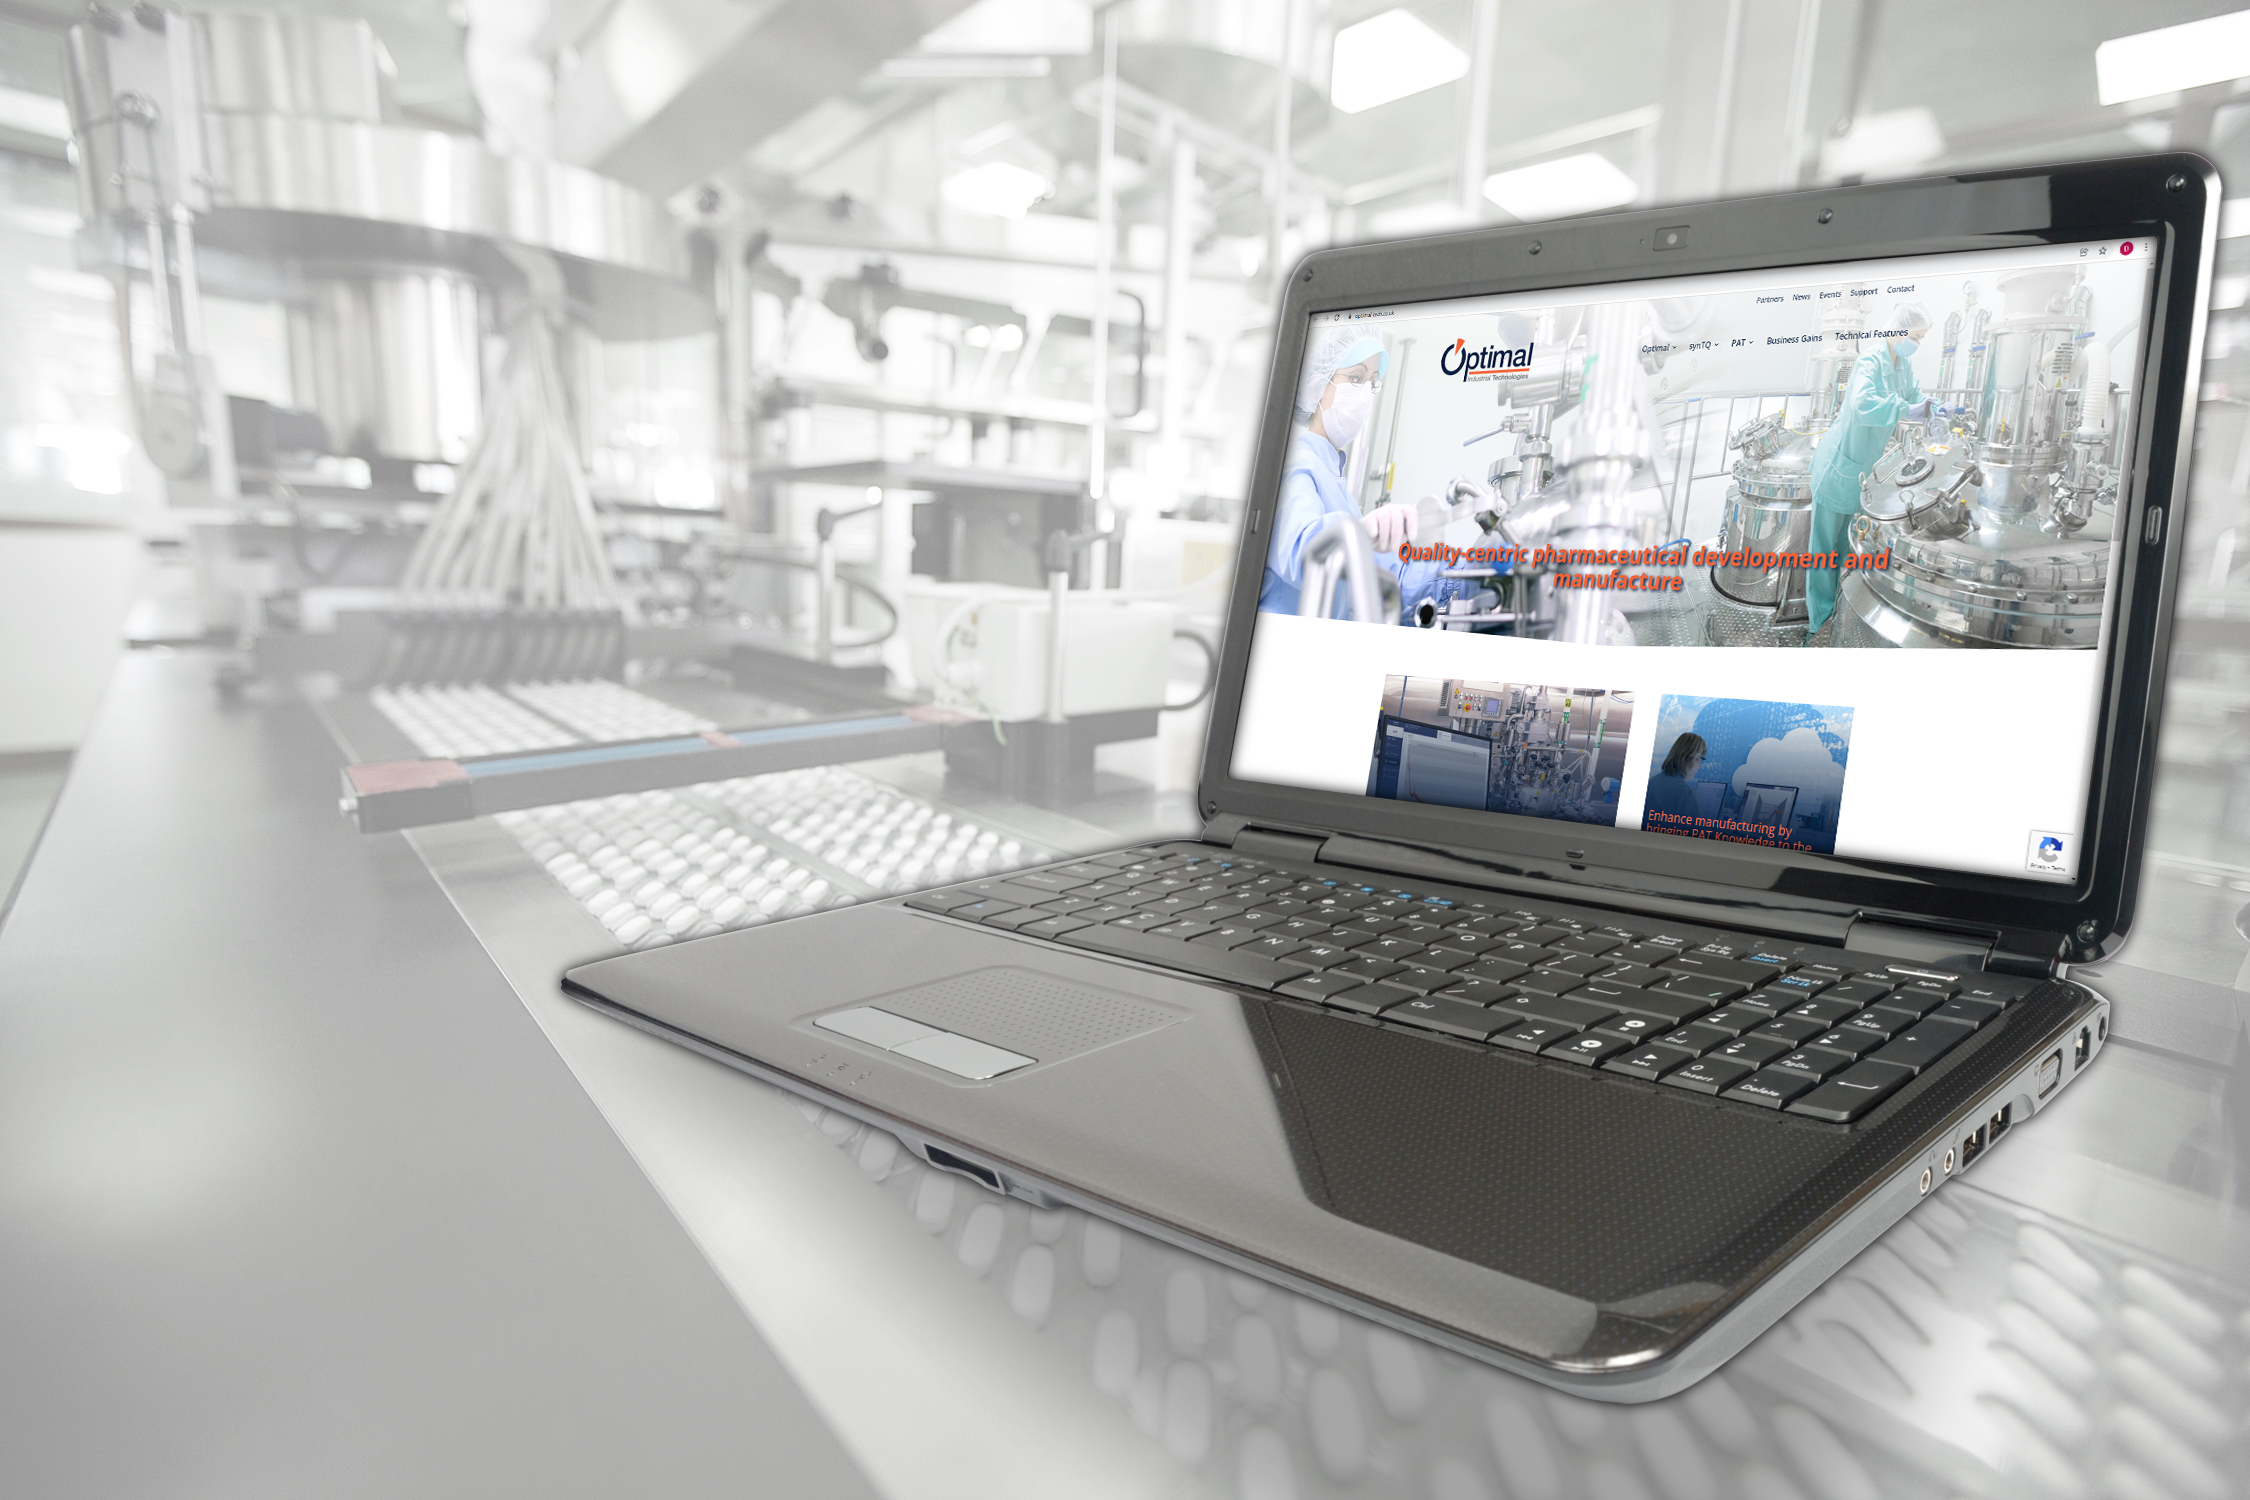 Optimal Industrial Technologies’ new website highlights the production as well as commercial benefits offered by Process Analytical Technology (PAT) in the manufacturing and processing industries.